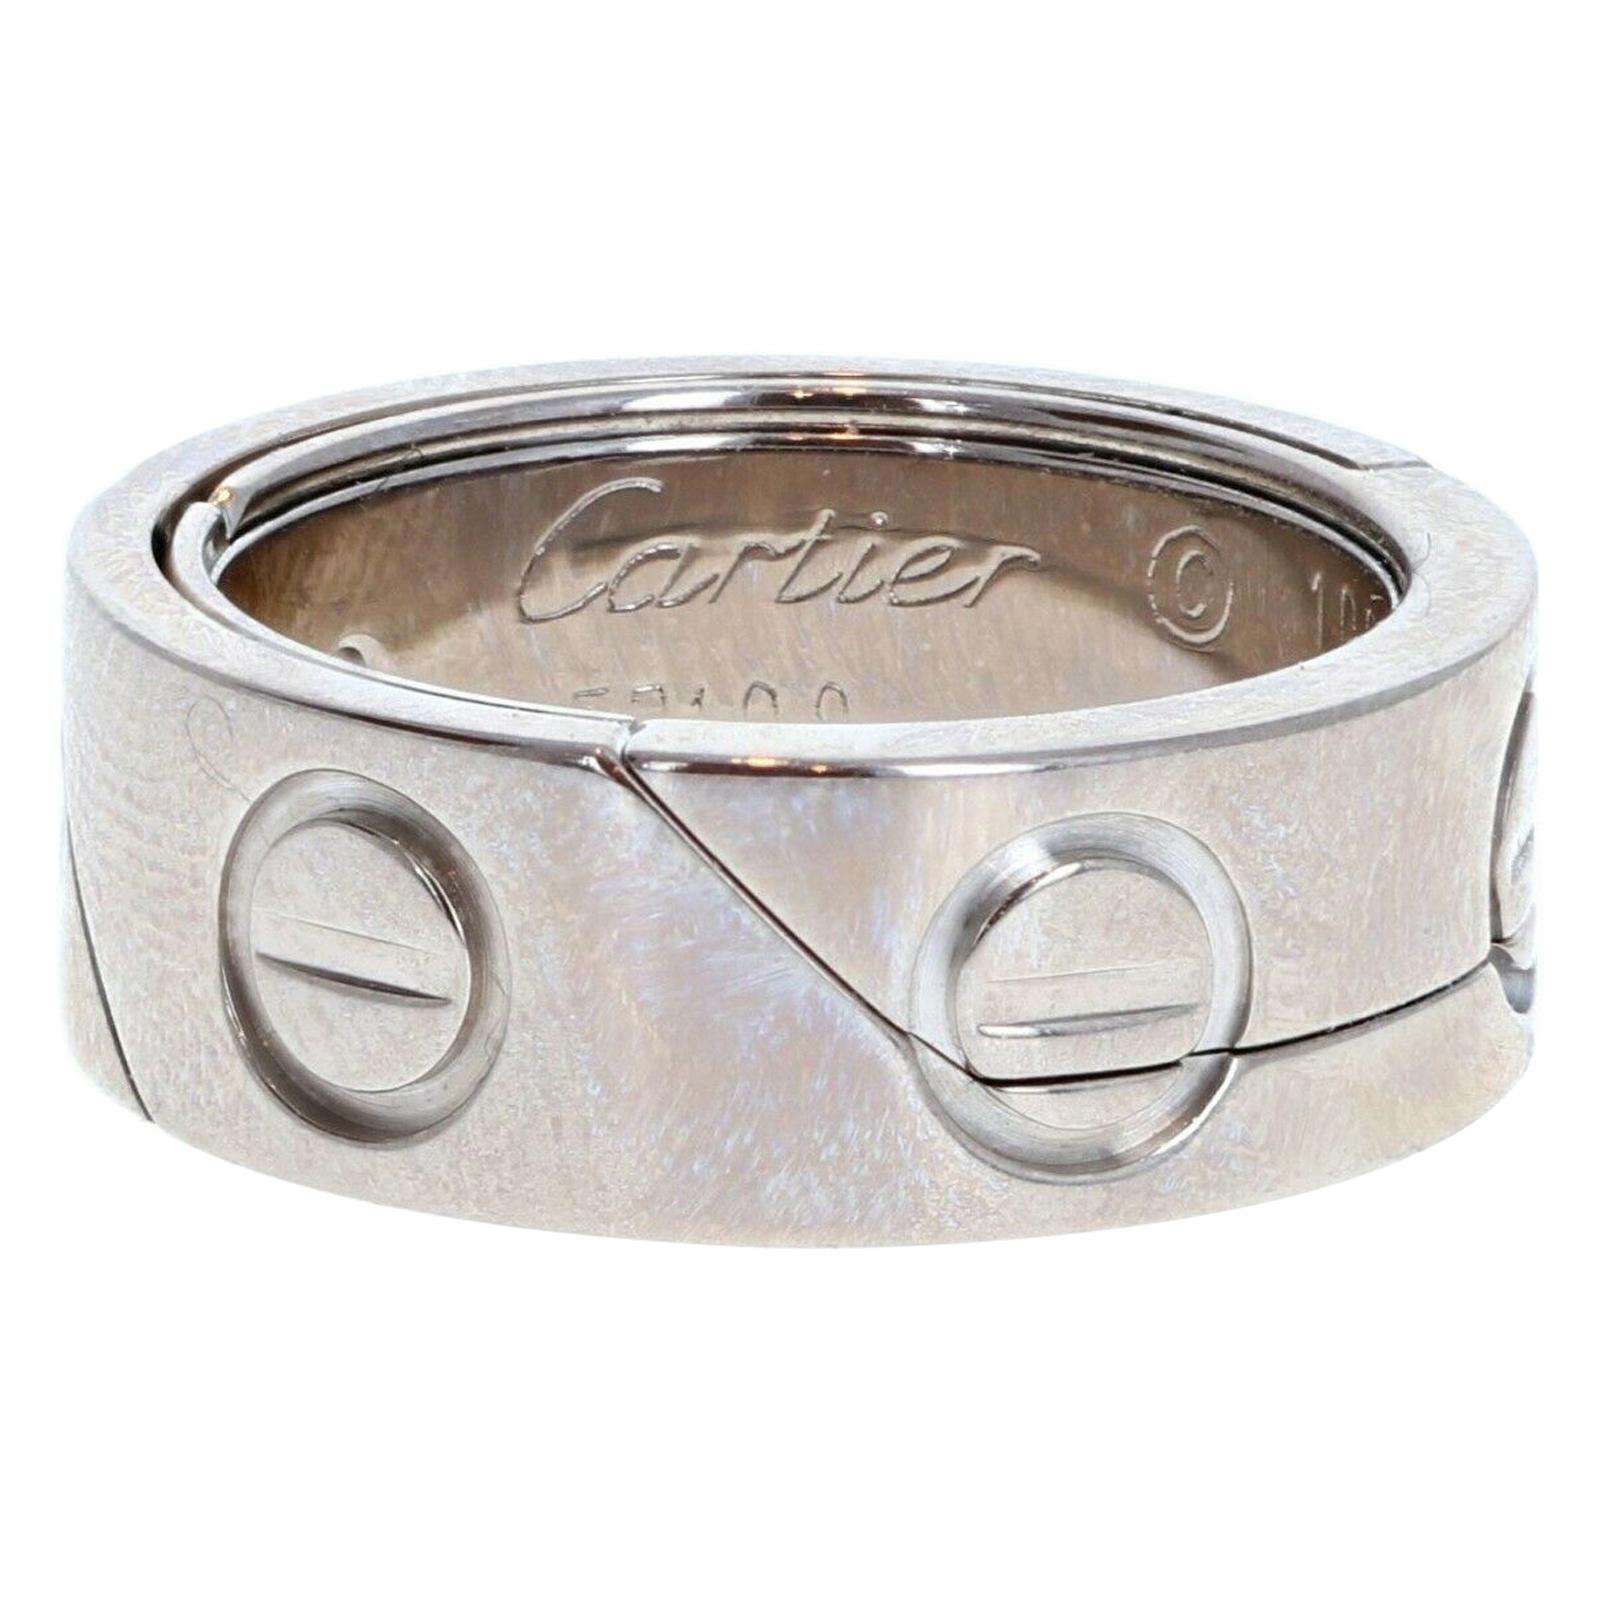 Cartier 18k White Gold Astro Love Band Ring 11.8g For Sale